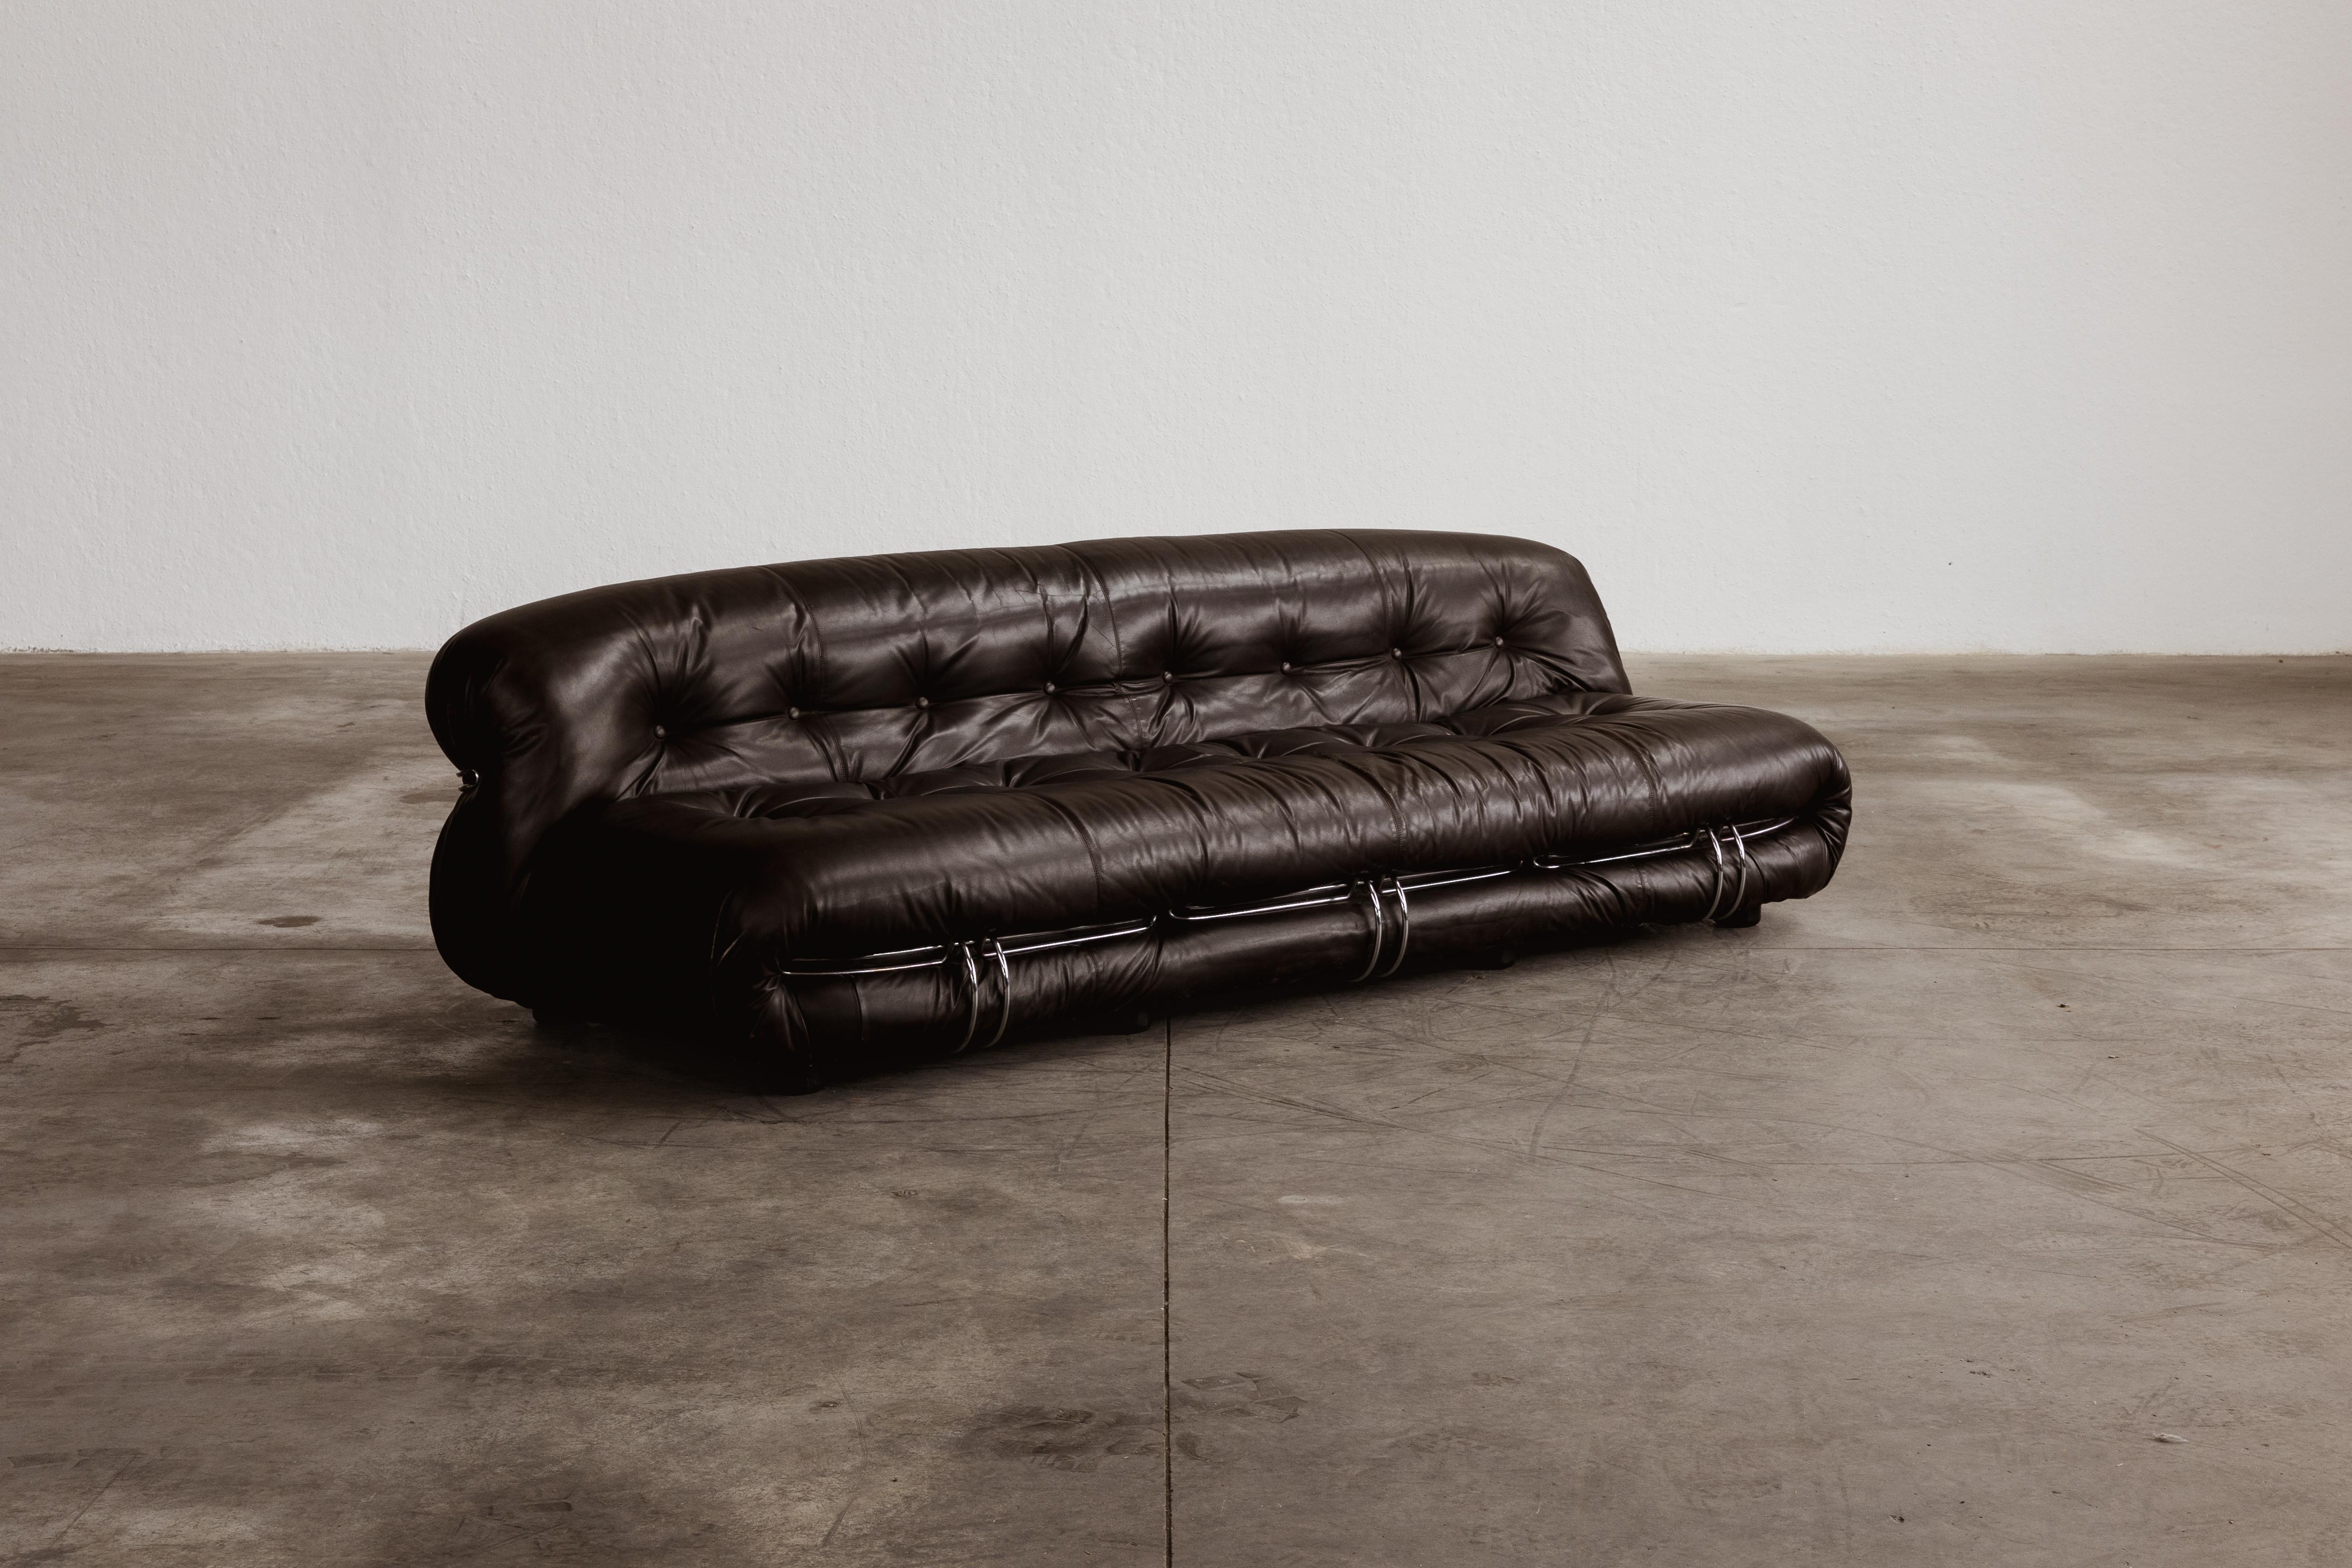 Afra & Tobia Scarpa “Soriana” three-seater sofa for Cassina, original brown leather and chromed steel, Italy, 1969.

Although technically designed in the 1960s, the 